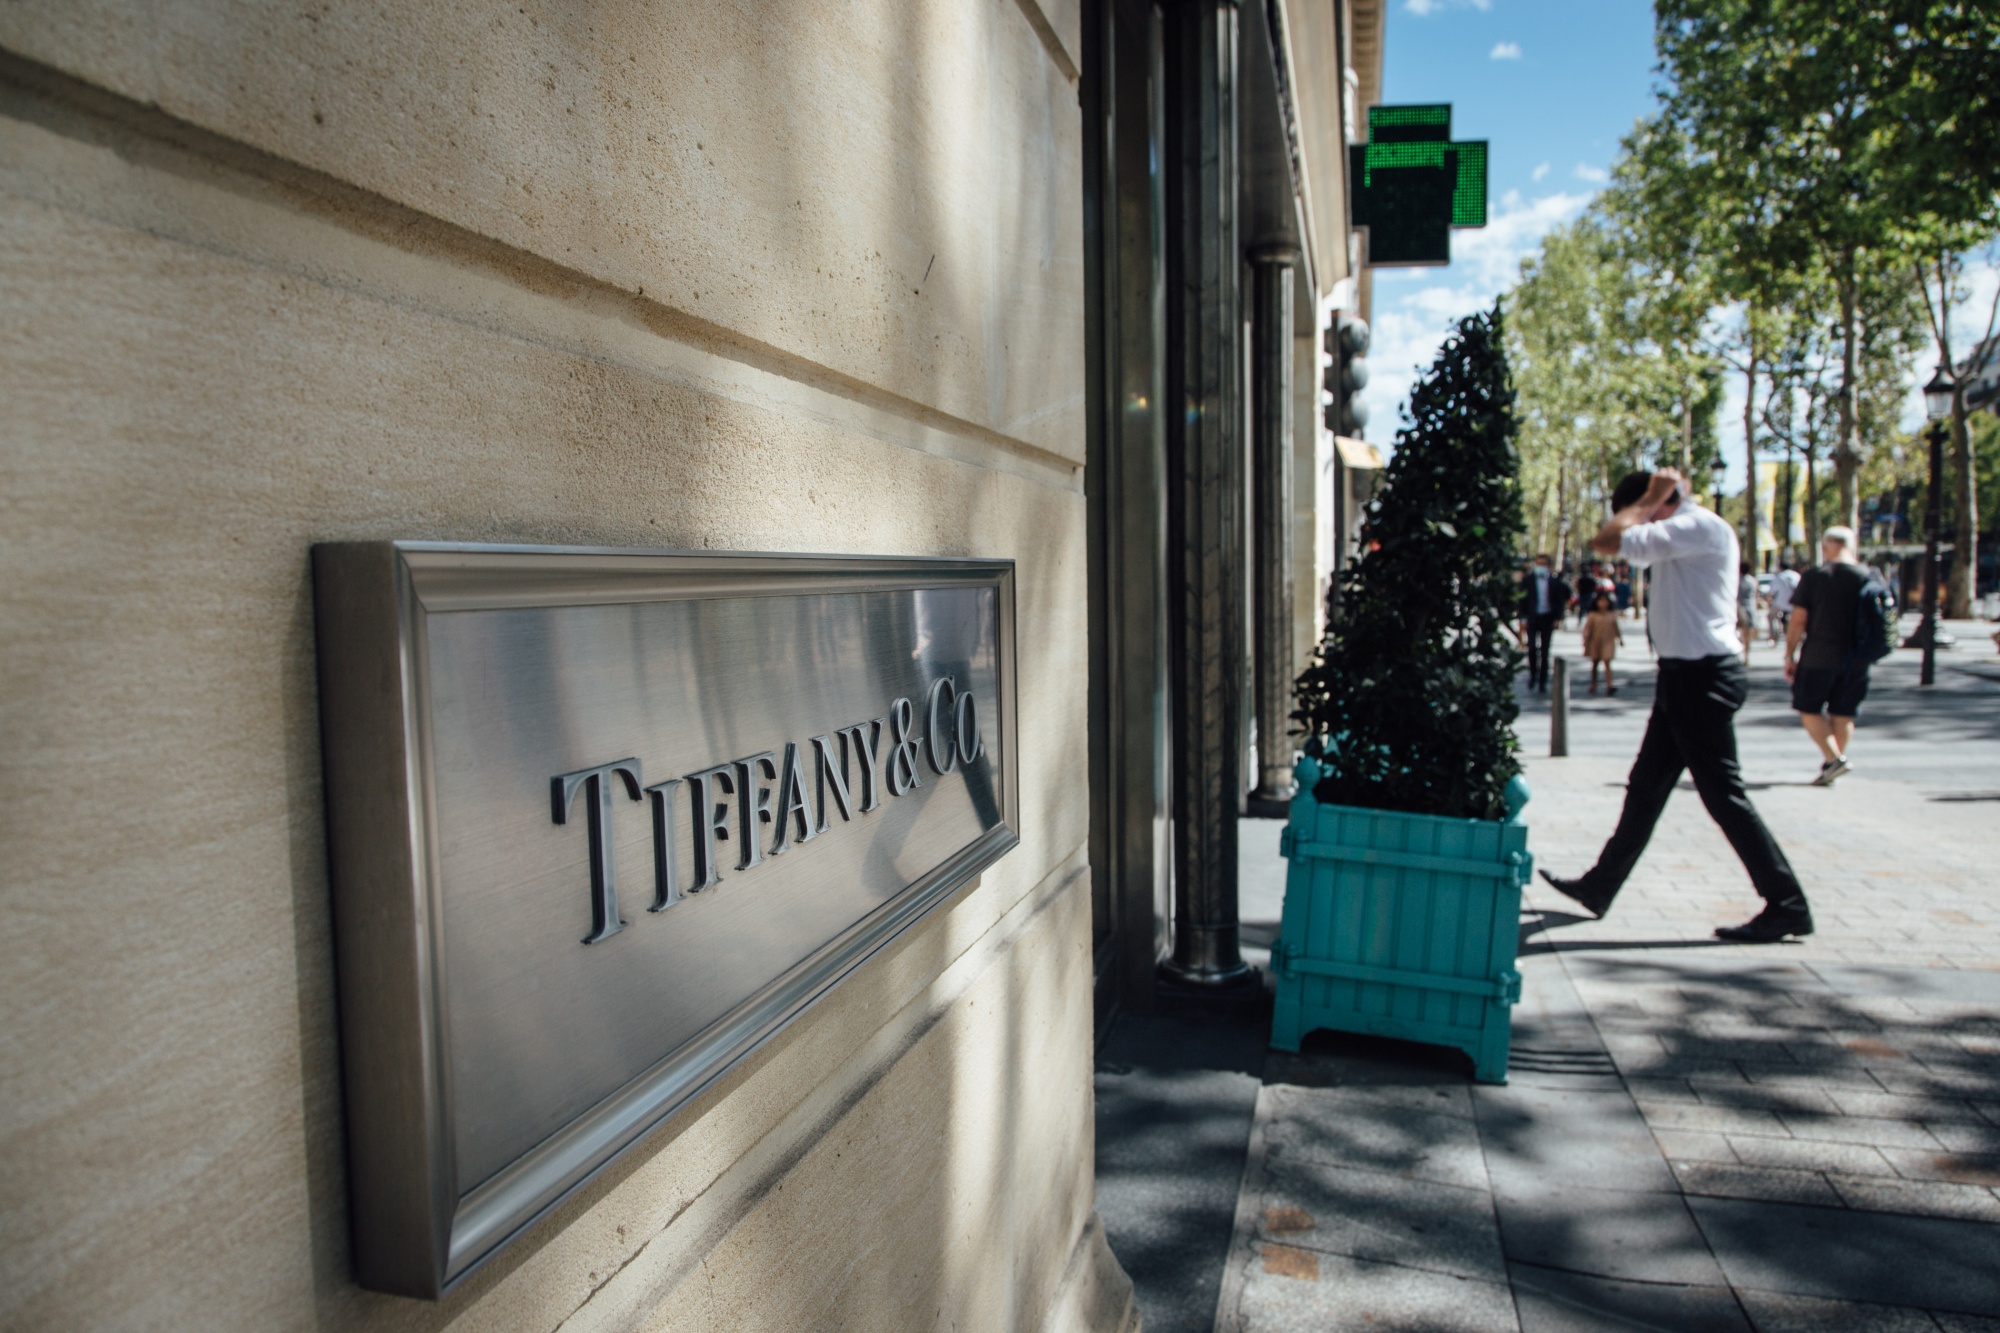 Declassified: LVMH / Tiffany (XPAR:MC set to acquire NYSE:TIF by